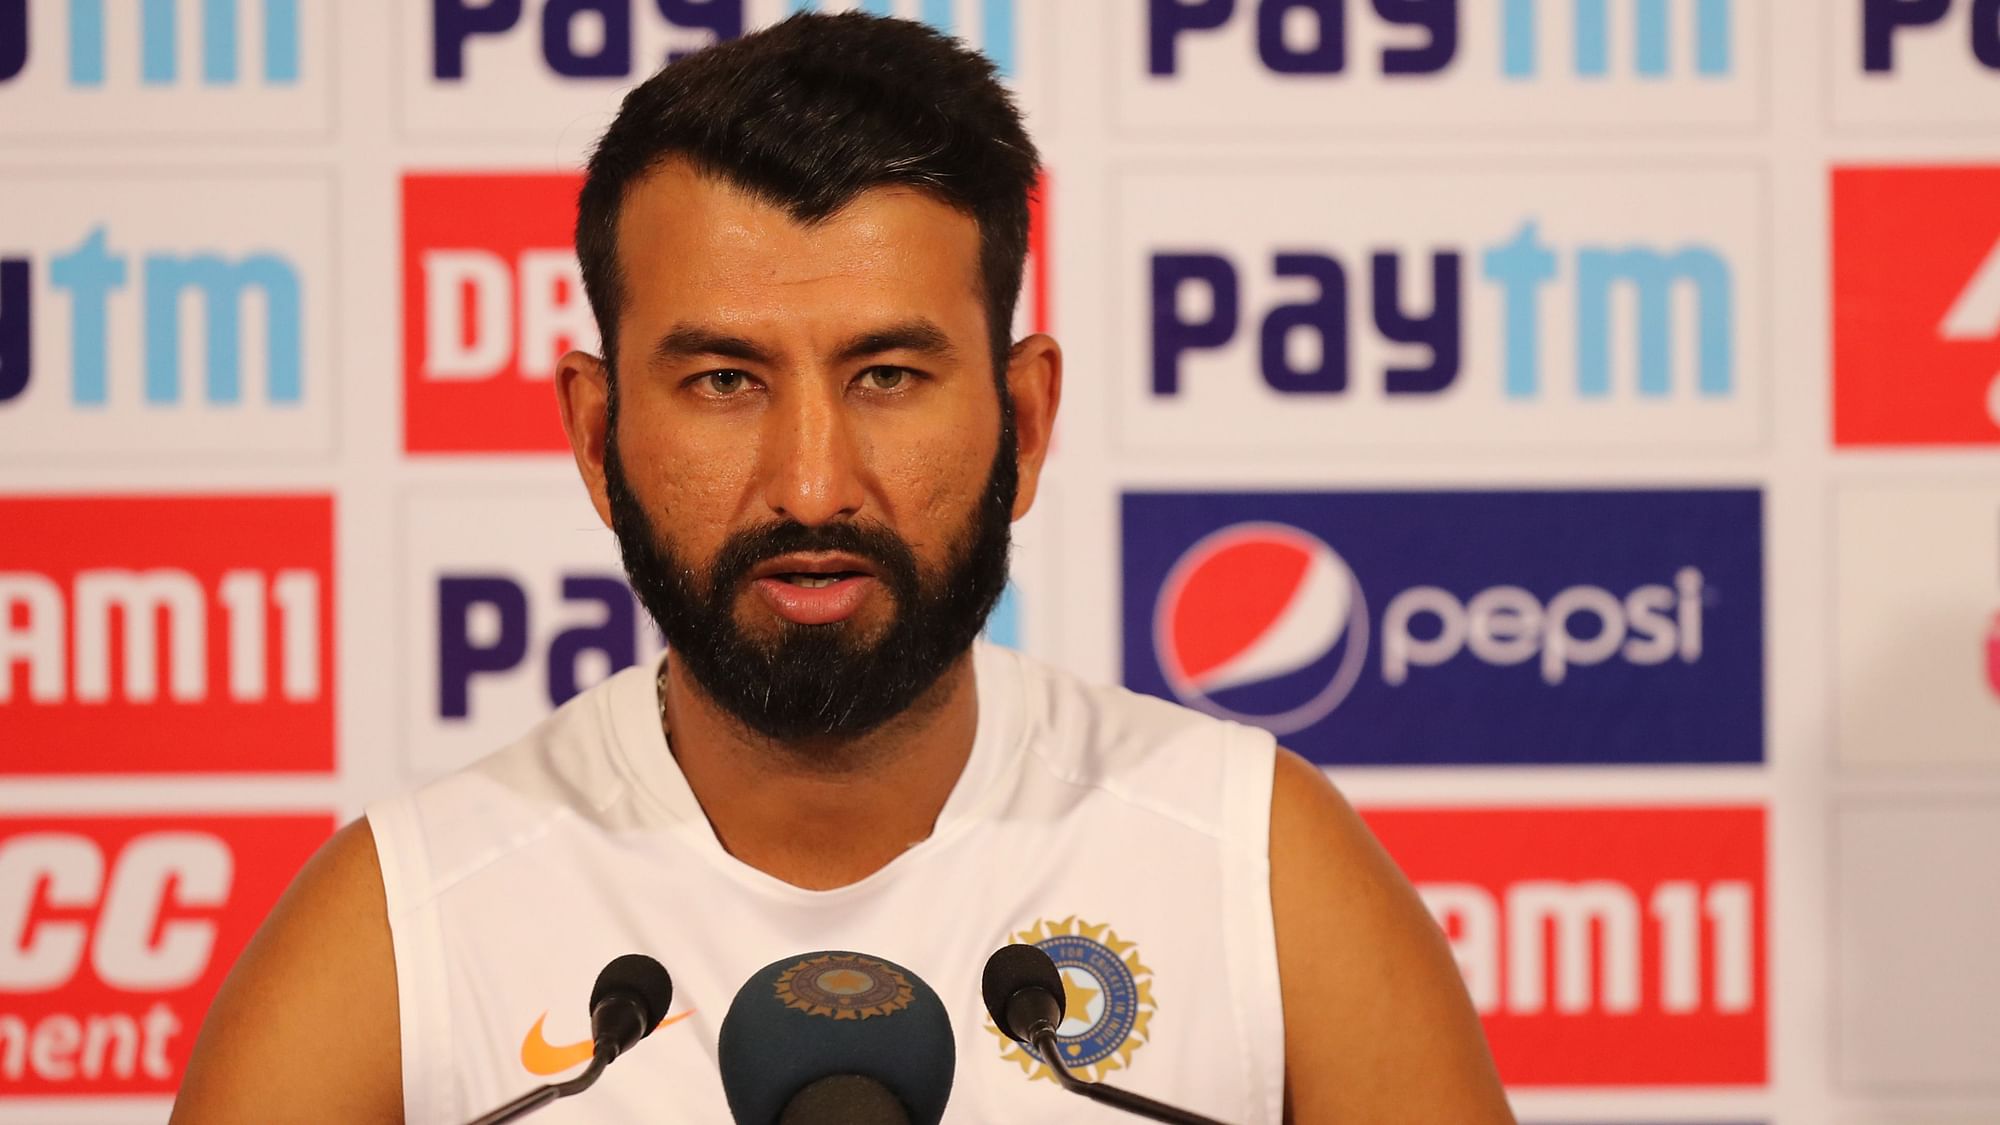 Cheteshwar Pujara is hoping that the traditional Test format, in which he thrives with his workmanlike approach, will continue to exist.